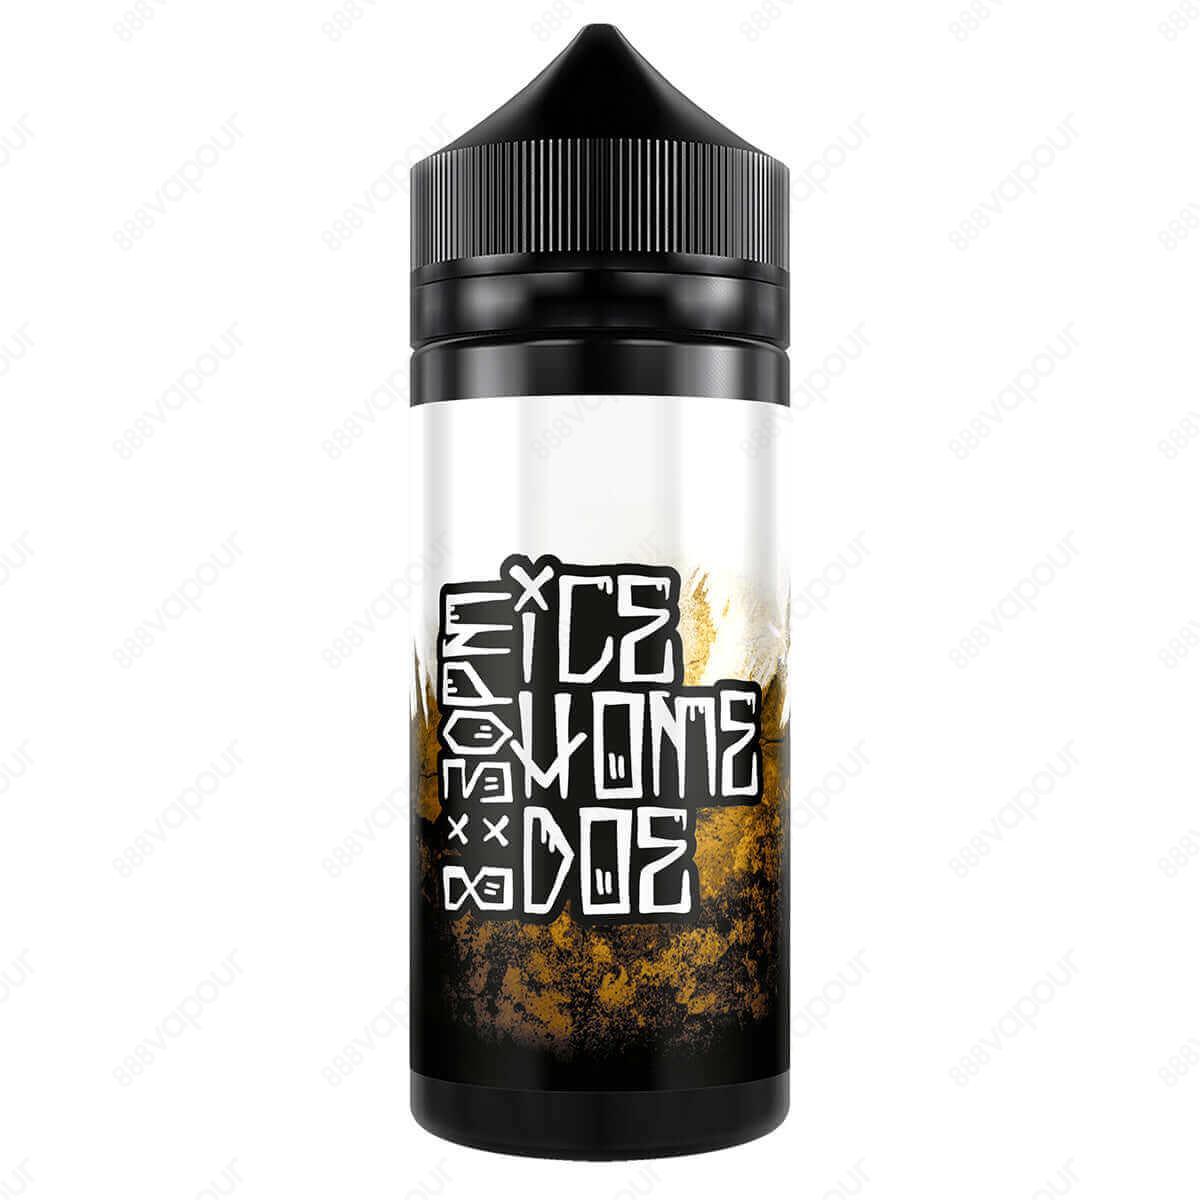 Ice Home Doe 8:30PM E-Liquid | £14.99 | 888 Vapour | Ice Home Doe 8:30PM e-liquid is a blend of passionfruit, peach and grapefruit with ice! 8:30PM by Ice Home Doe is available in a 100ml 0mg shortfill, with space to add two 10ml 18mg nicotine shots to cr